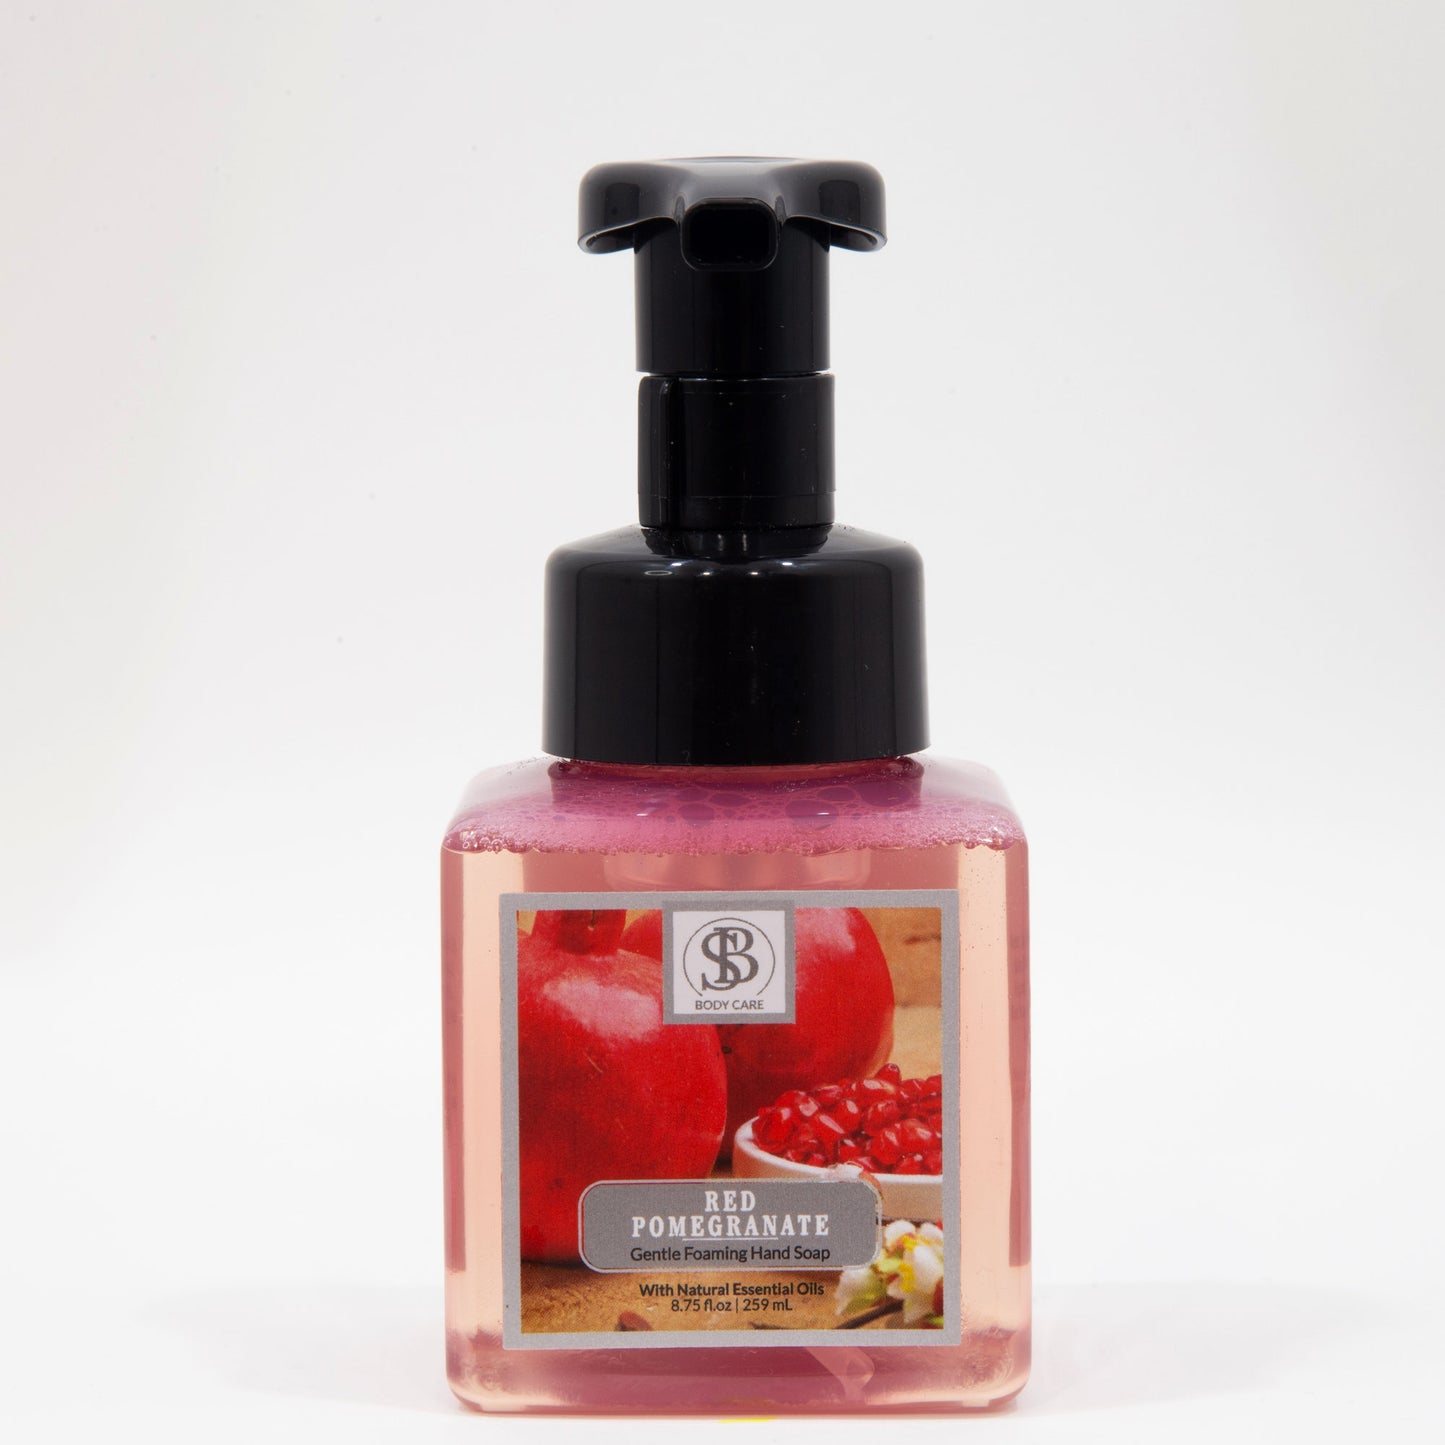 RED POMEGRANATE Gentle Foaming Hand Soap